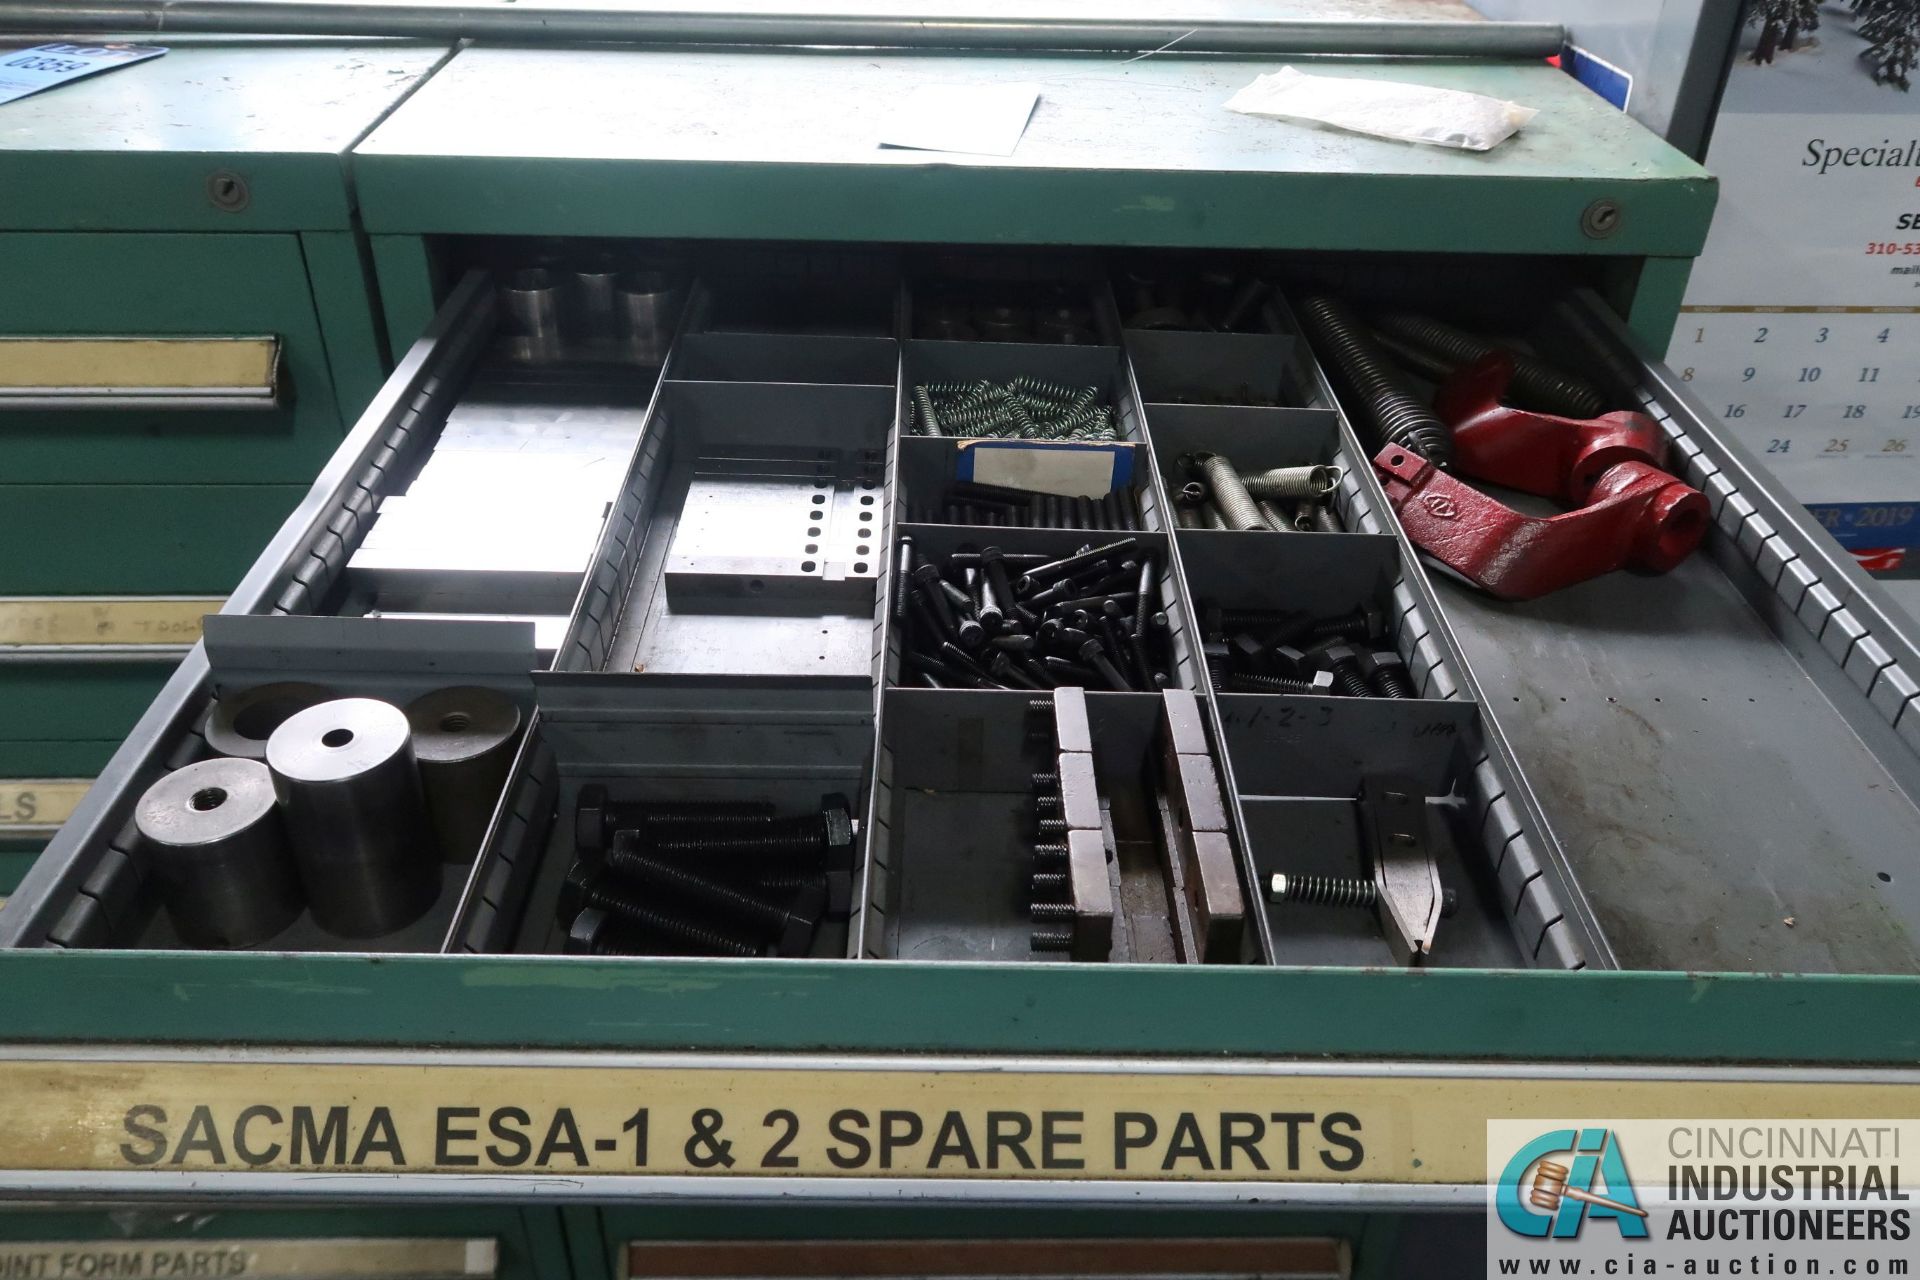 10-DRAWER LISTA-TYPE CABINET WITH SACMA TOOLING & PARTS - Loading fee due the "ERRA" Pedowitz - Image 2 of 8